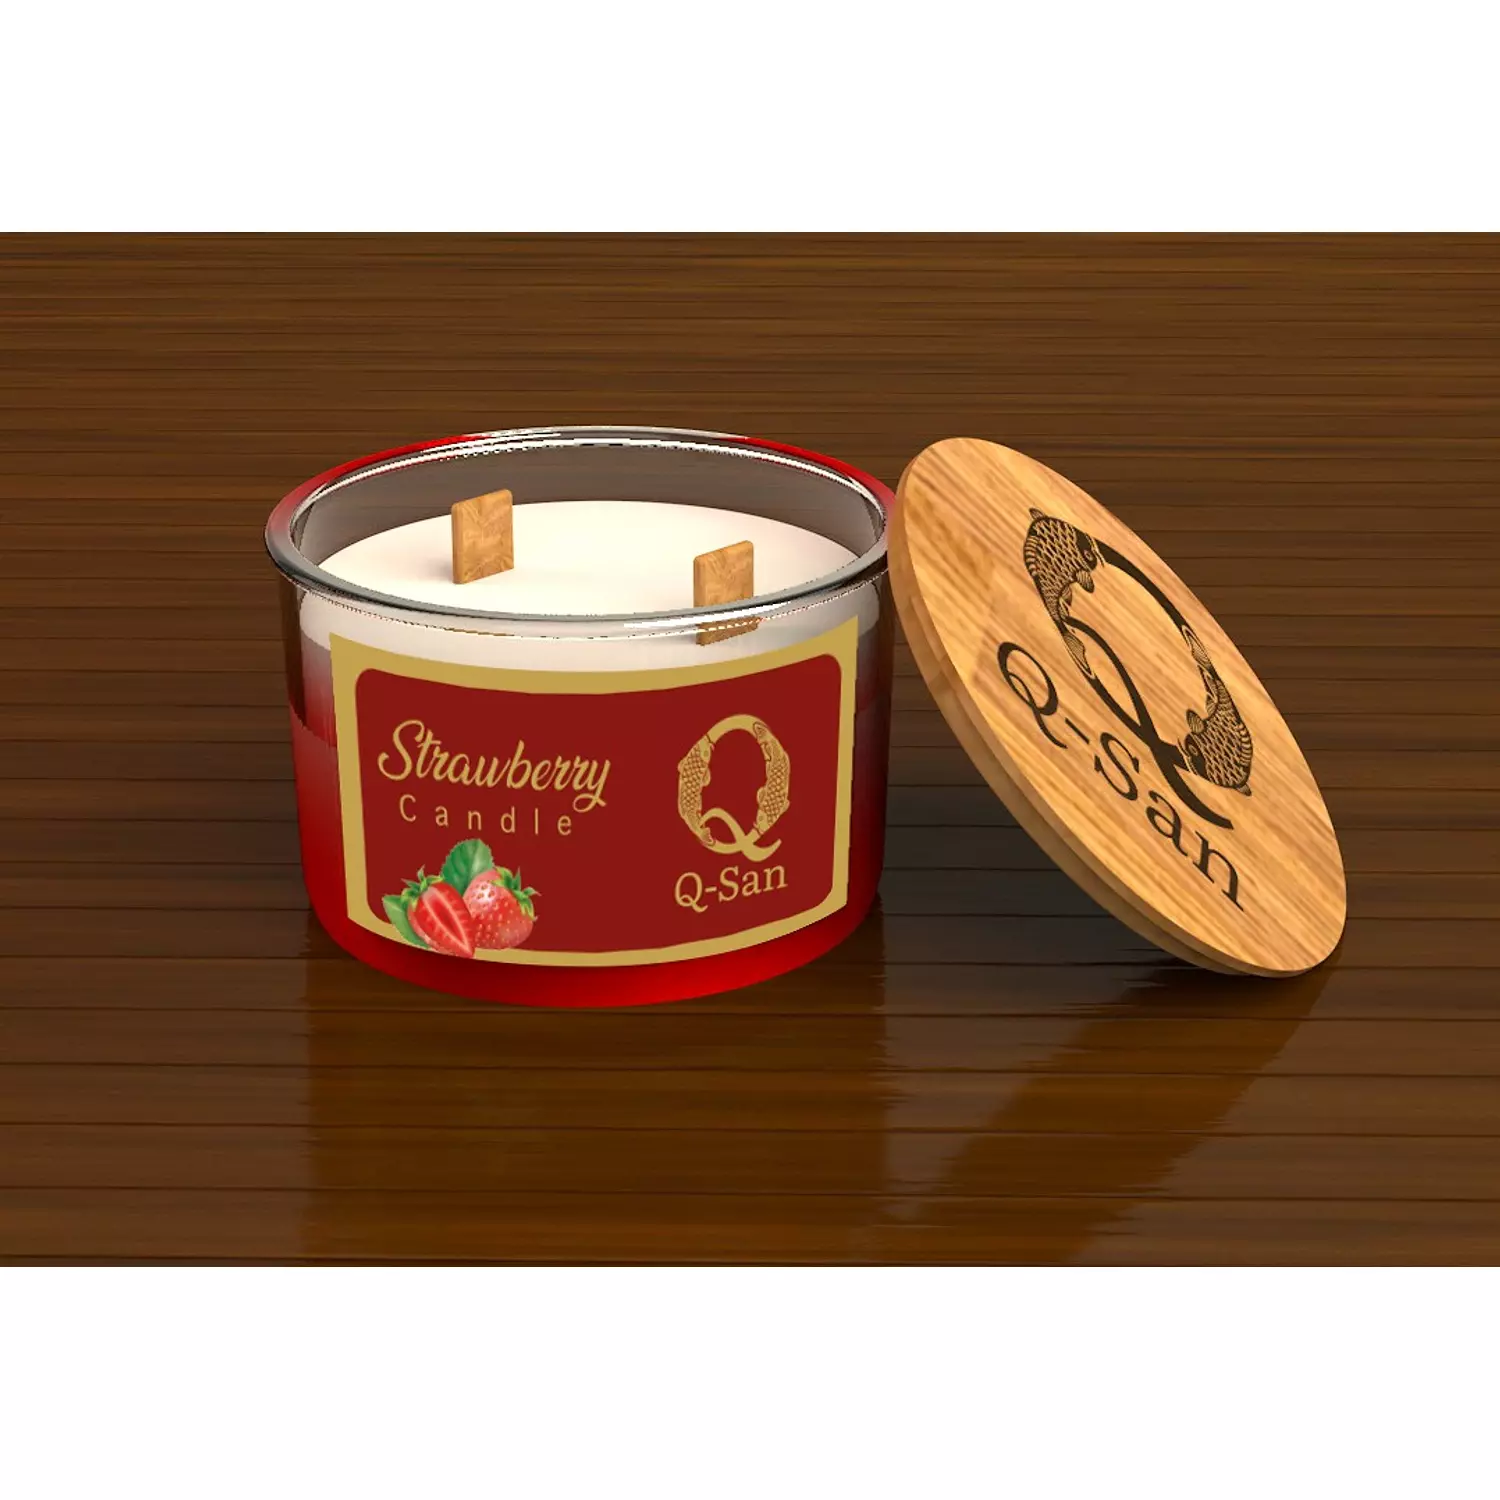 Strawberry Candle hover image